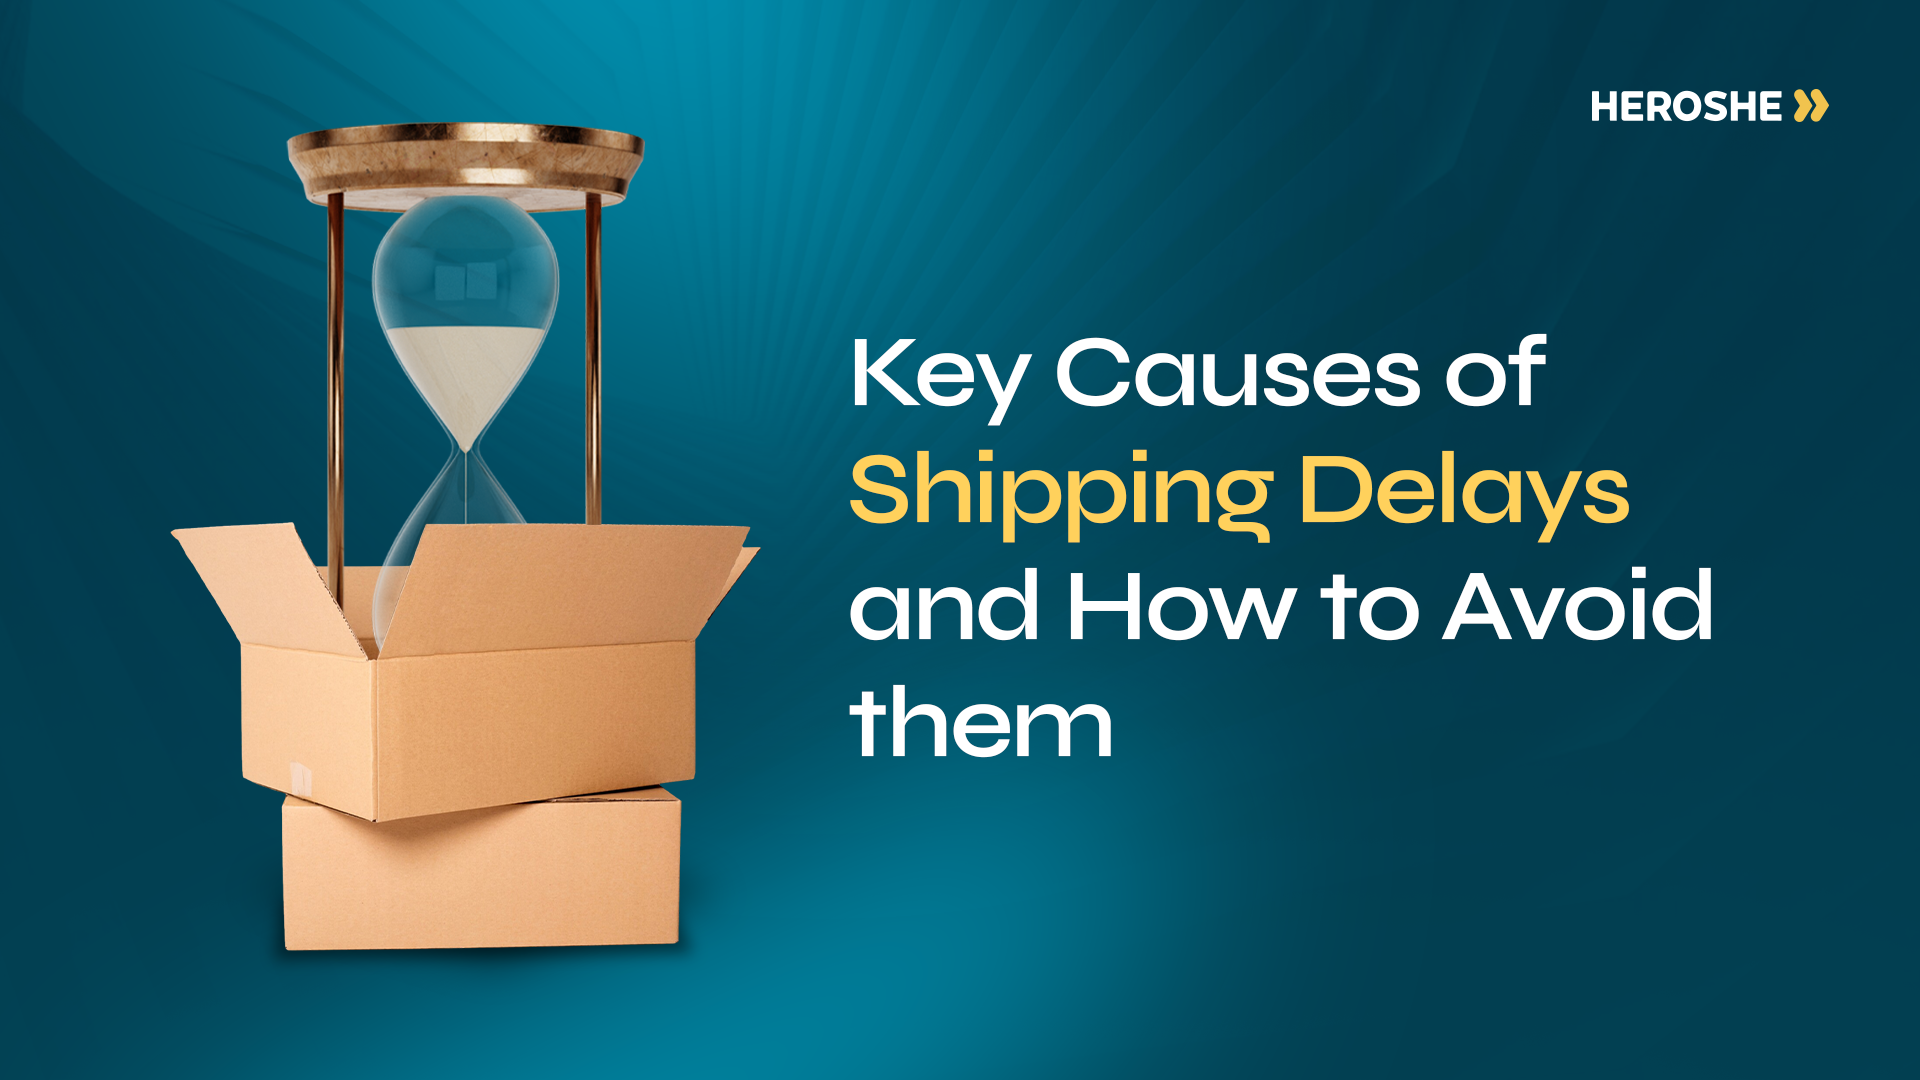 5 Key Causes of Shipping Delays and How to Avoid Them